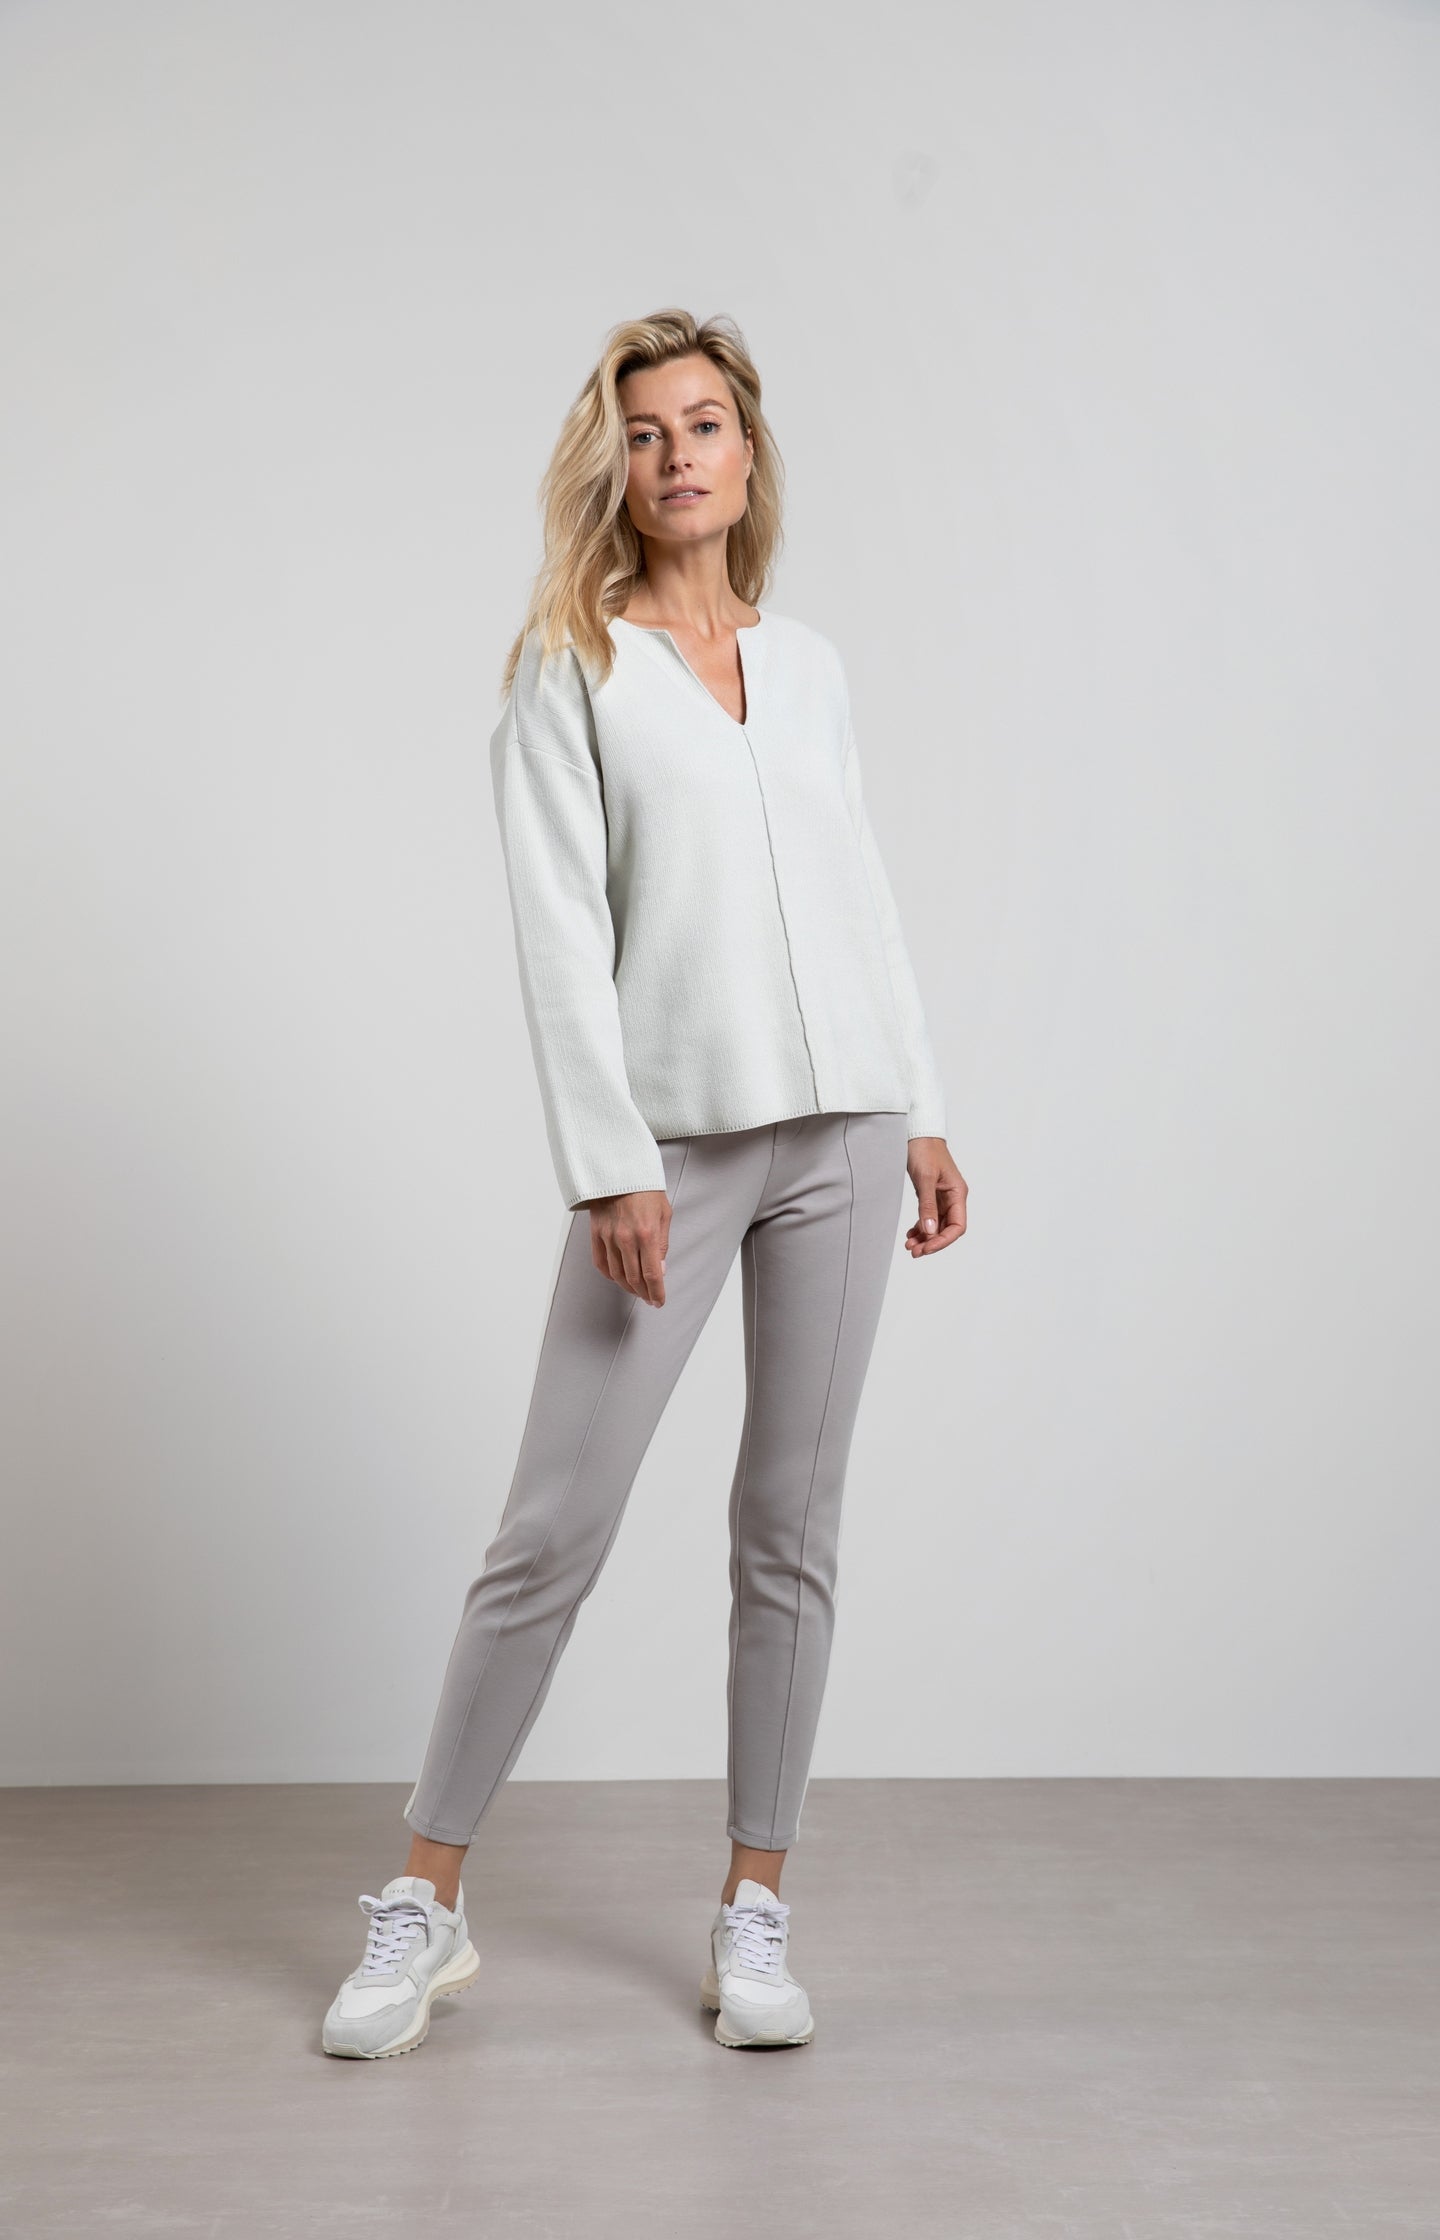 Scuba trousers with side pockets, seam details and stripe - Type: lookbook